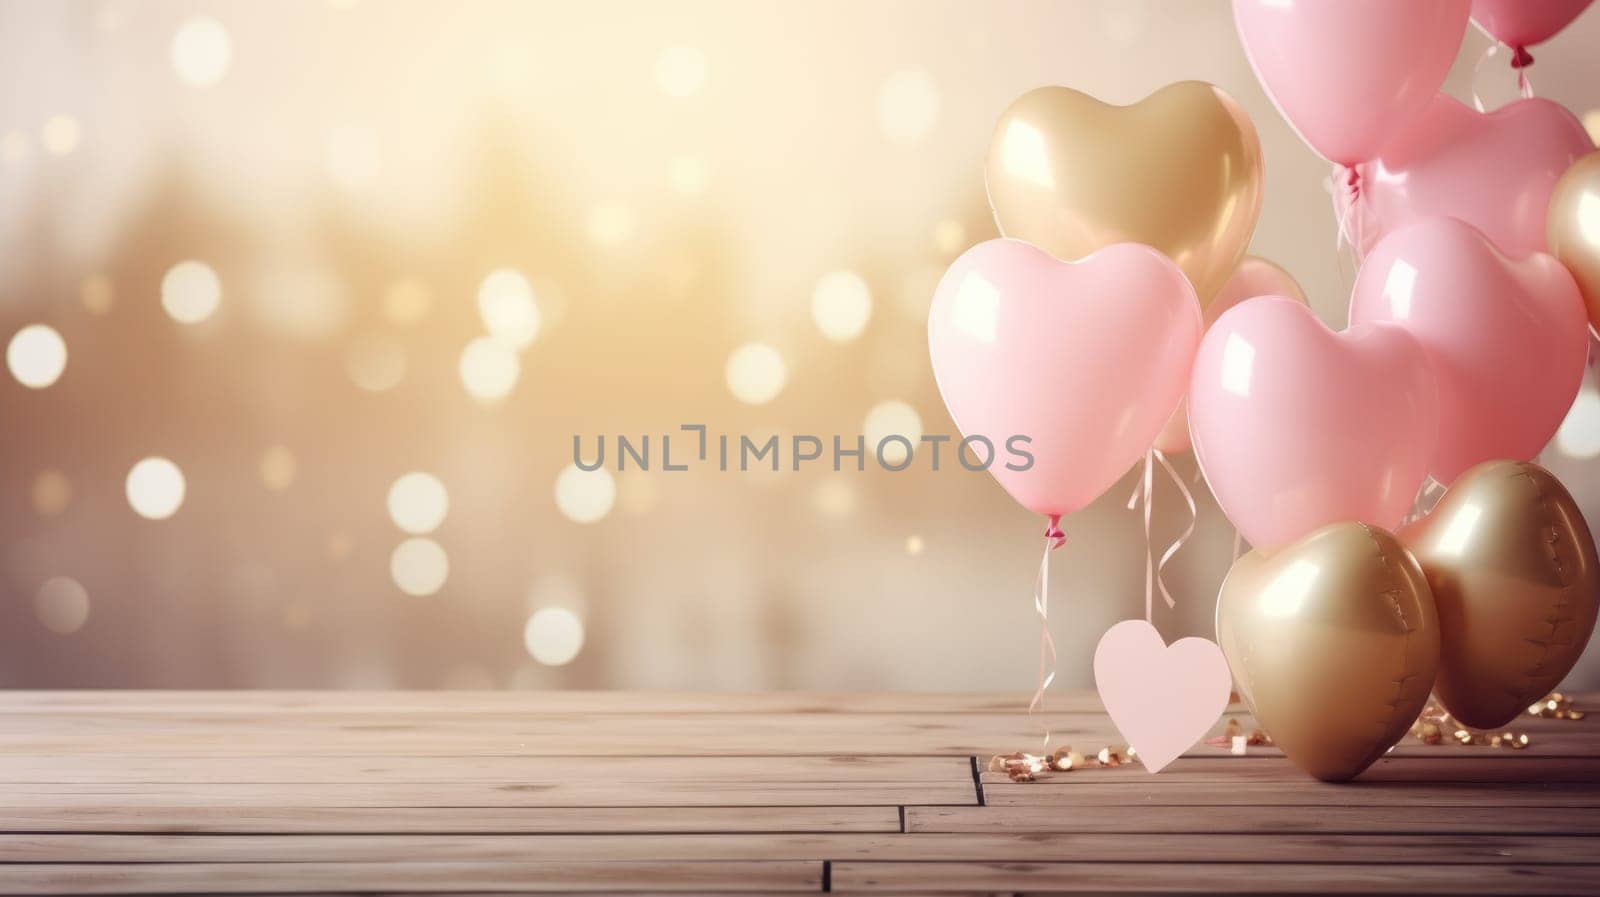 White wooden table in the foreground. Blurred background with balloons by natali_brill